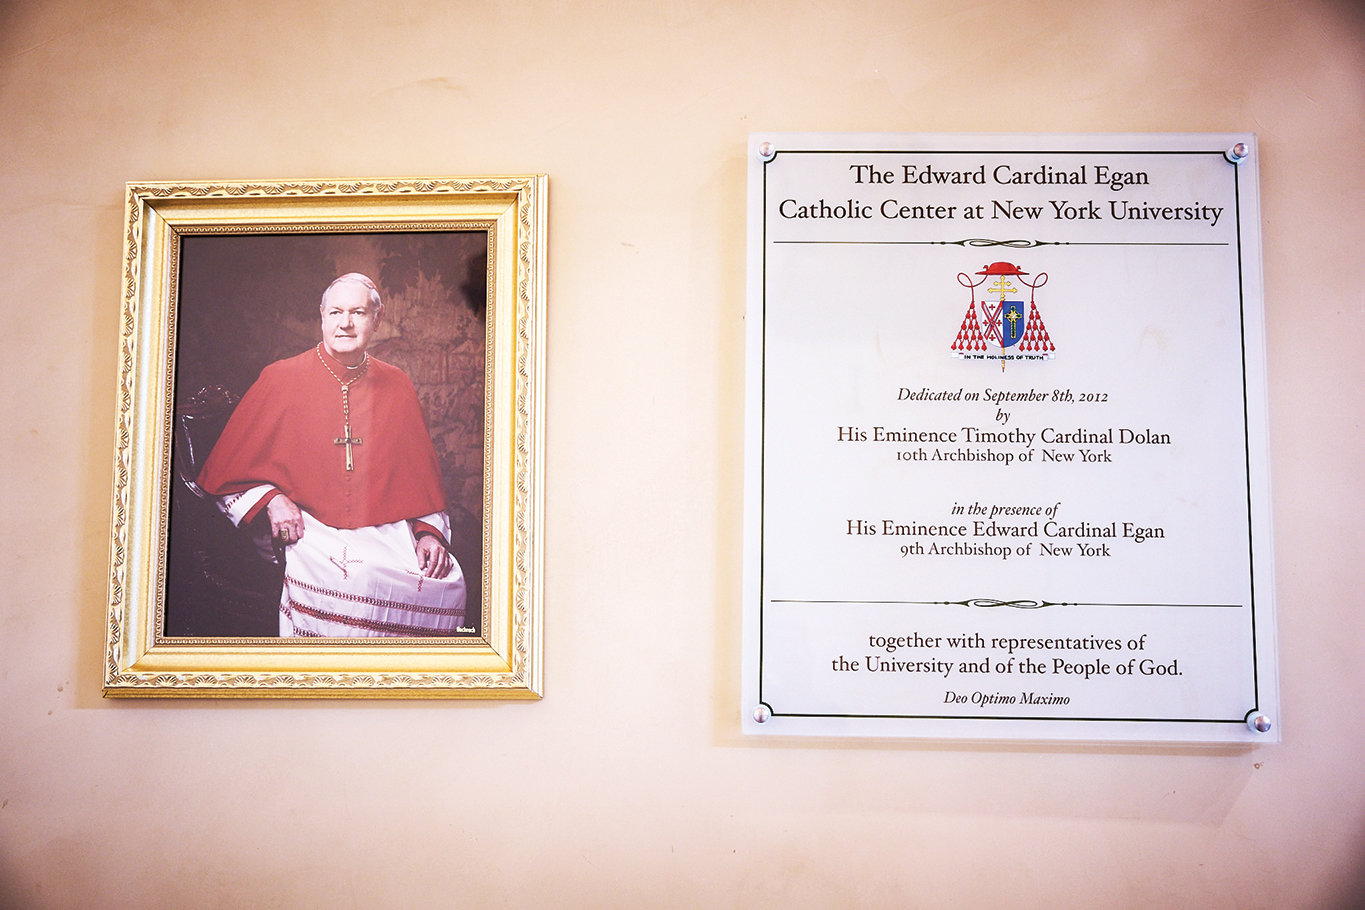 A portrait of Cardinal Egan is next to a plaque commemorating the center’s 2012 dedication by Cardinal Dolan in the presence of his predecessor.